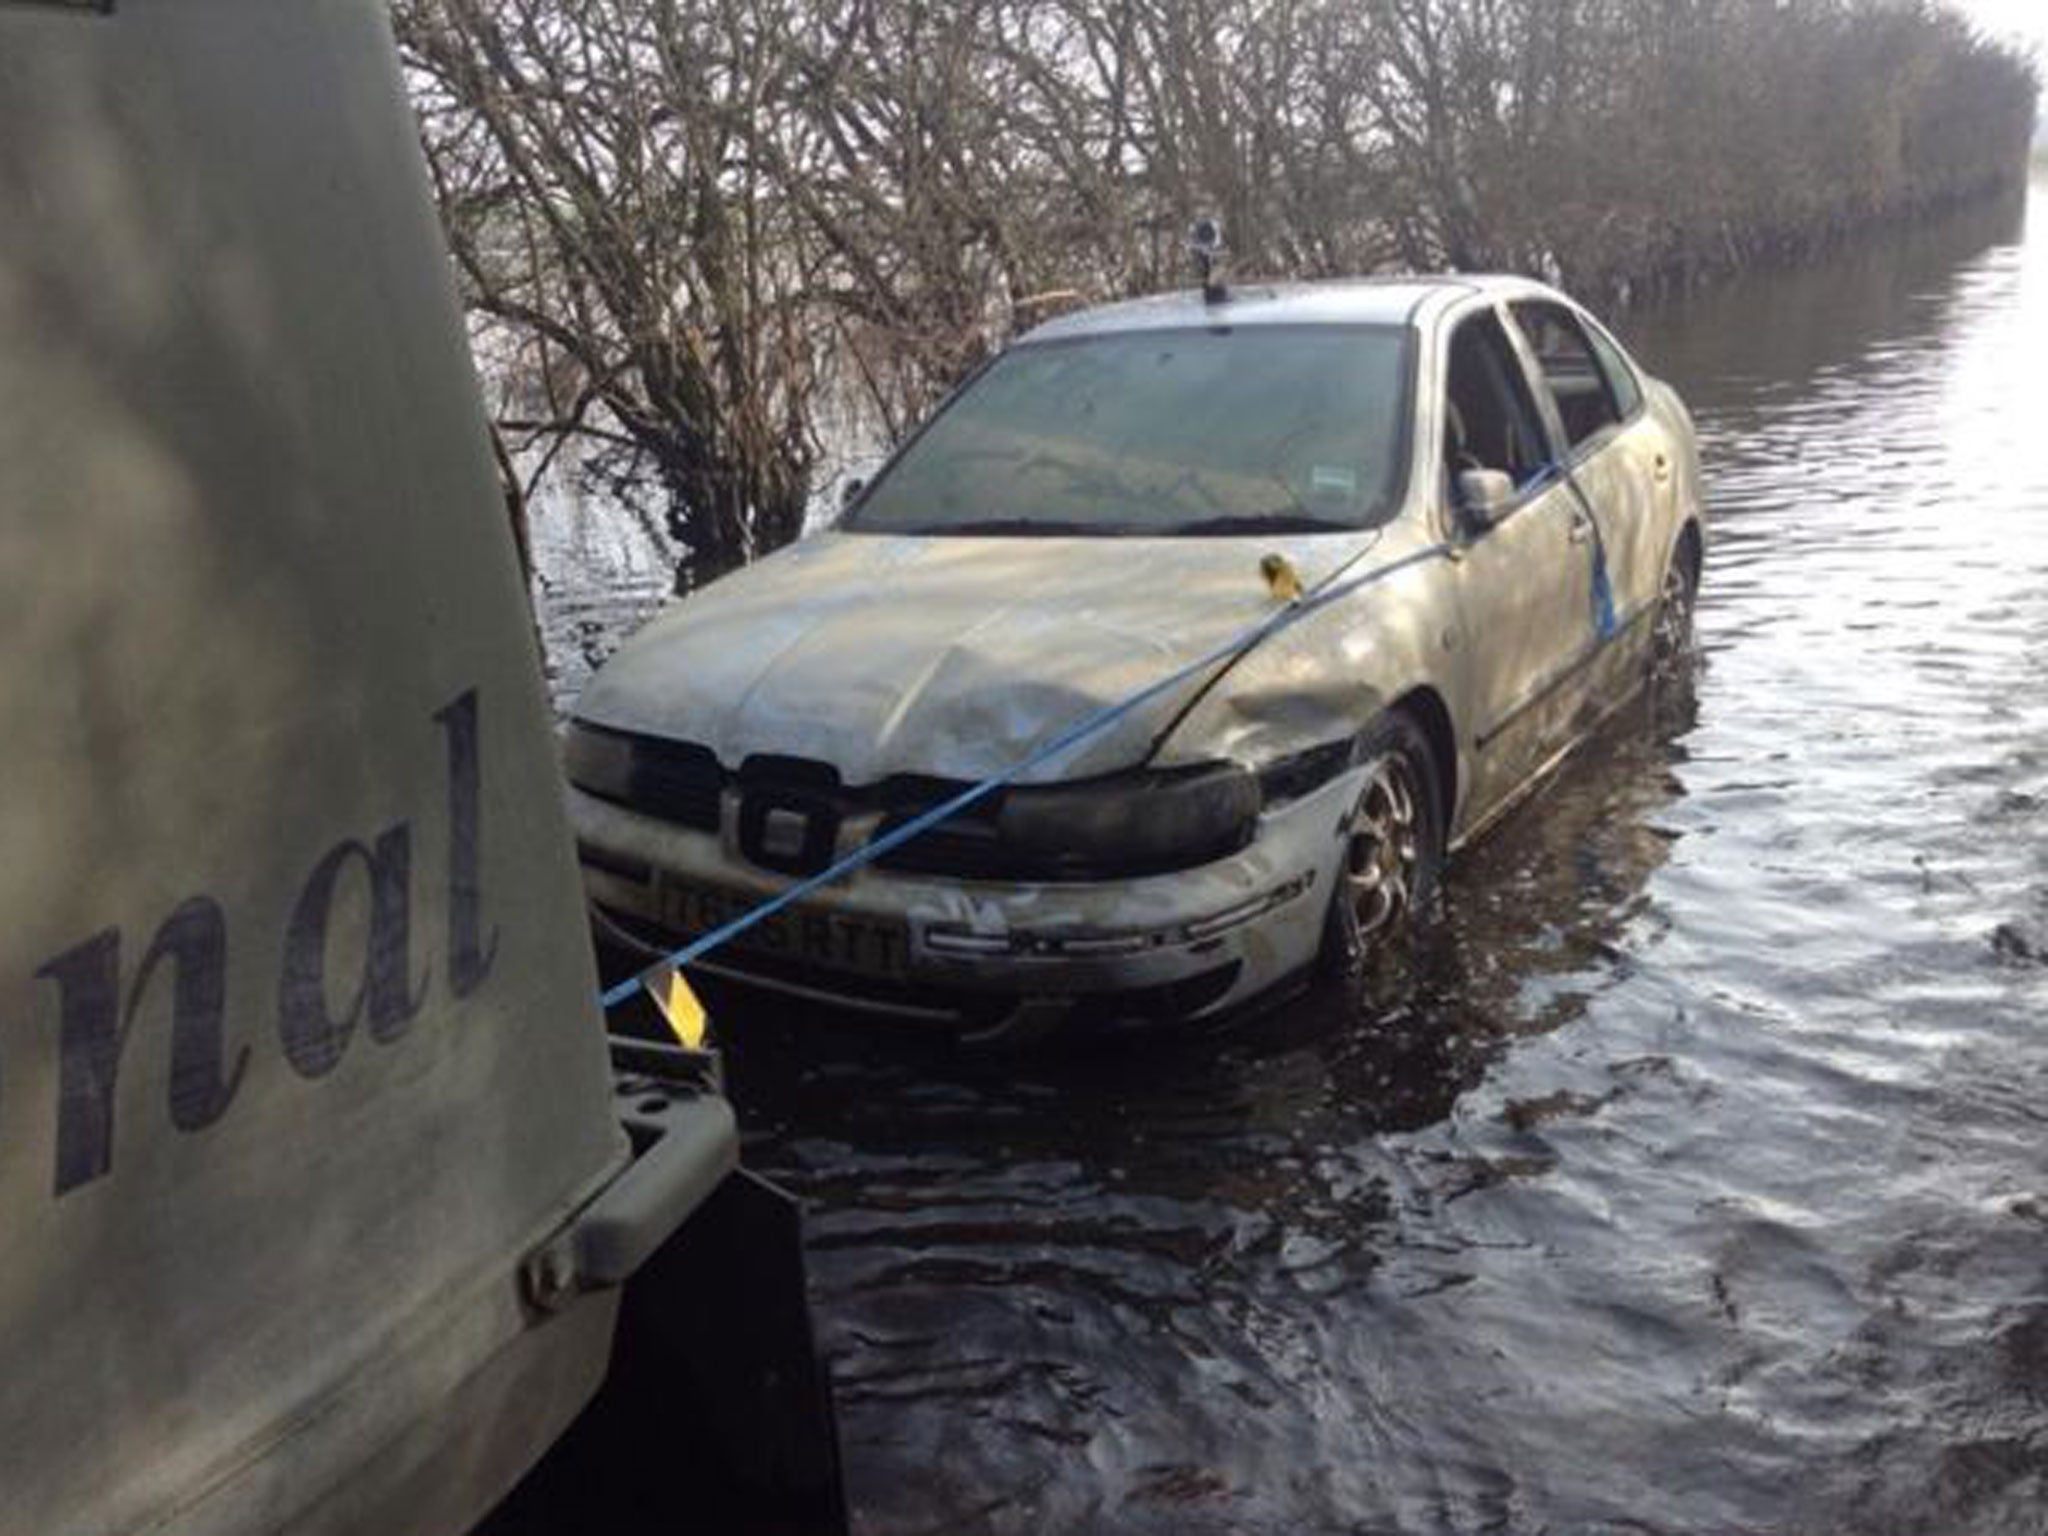 The submerged Seat Toledo, pictured here as it was finally towed away last week, featured in national and international media coverage of the floods